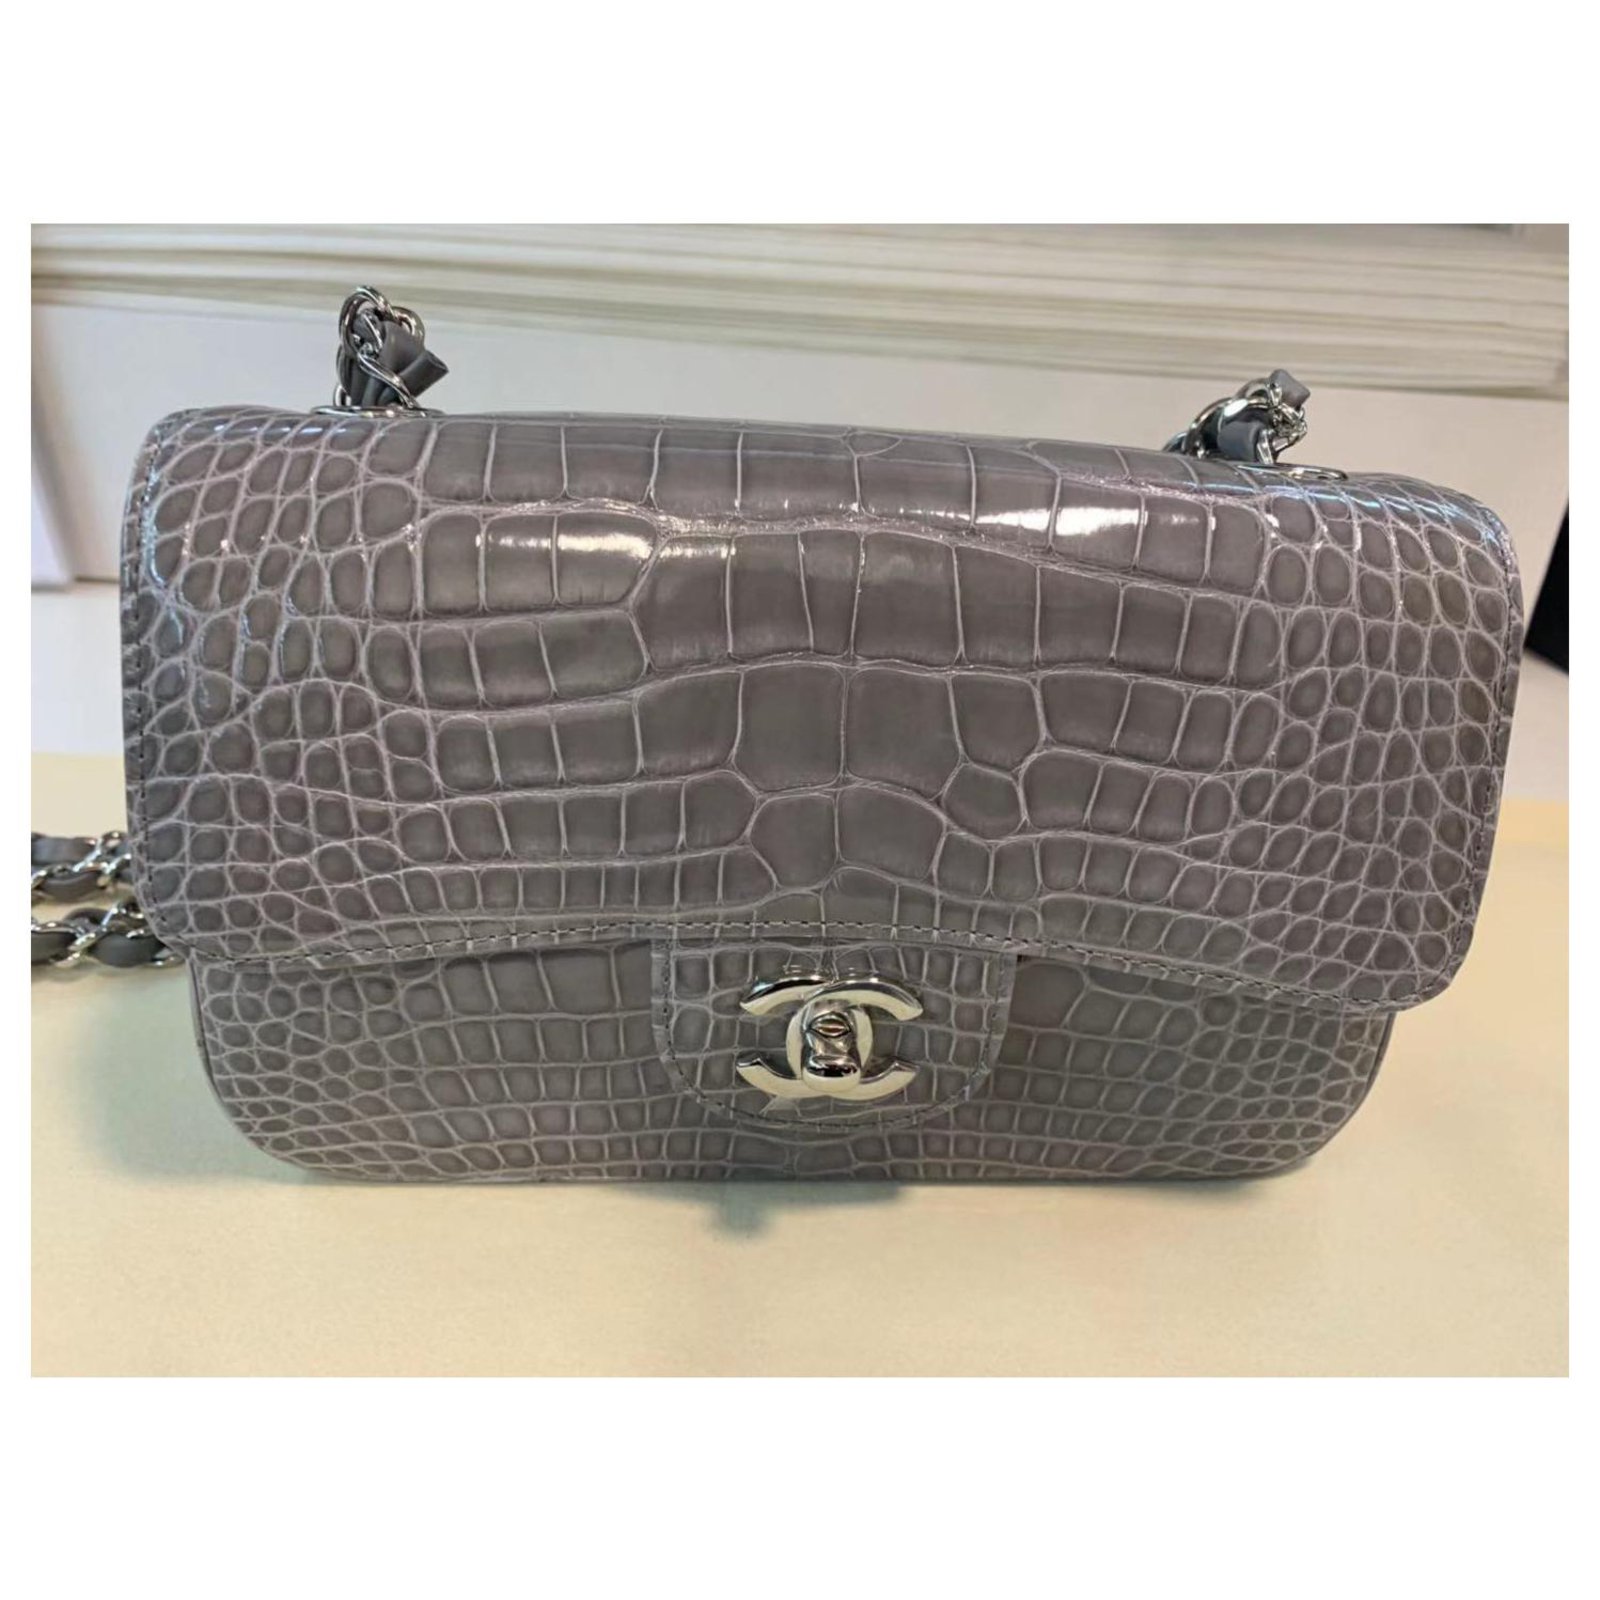 Timeless/classique leather handbag Chanel Grey in Leather - 32795220